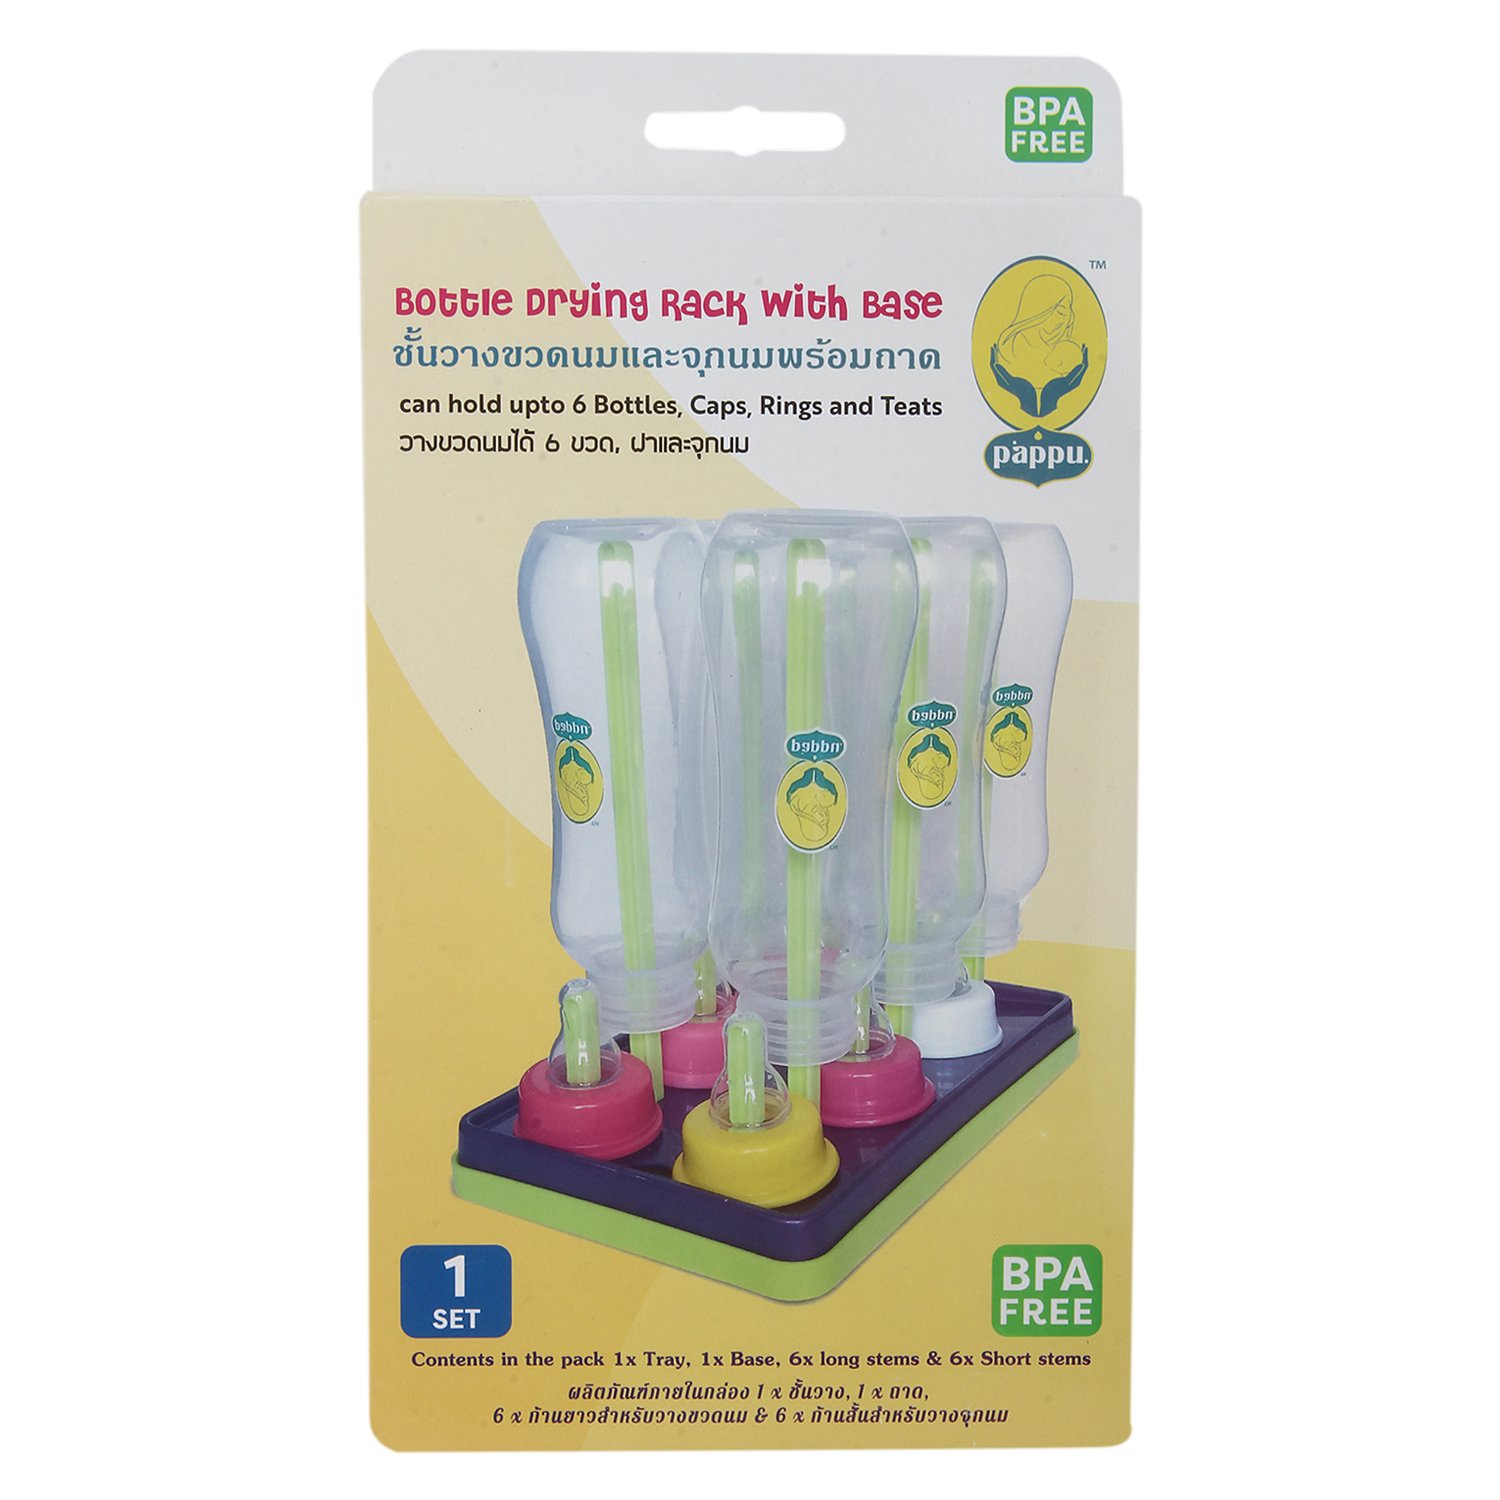 Pappu Bottle drying rack with base can Contain 6 Bottles